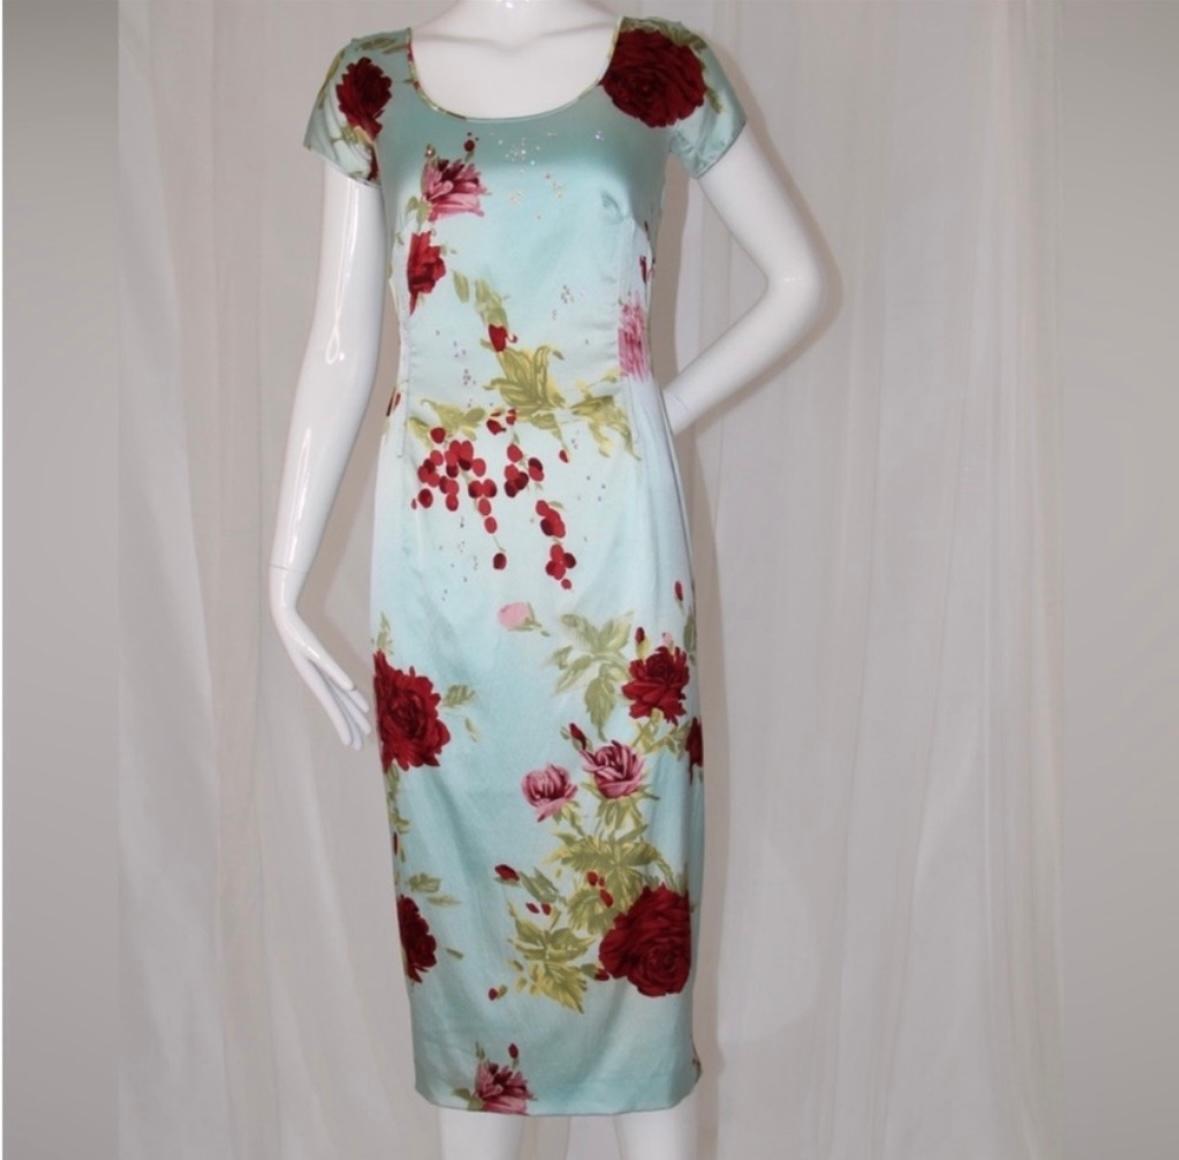 Authentic Dolce Gabbana 1997 silk floral dress 
Same print seen in “sex and the city” episode 

Embellished with Swarovski crystals 
Size 40 
Good vintage condition with normal overall wear